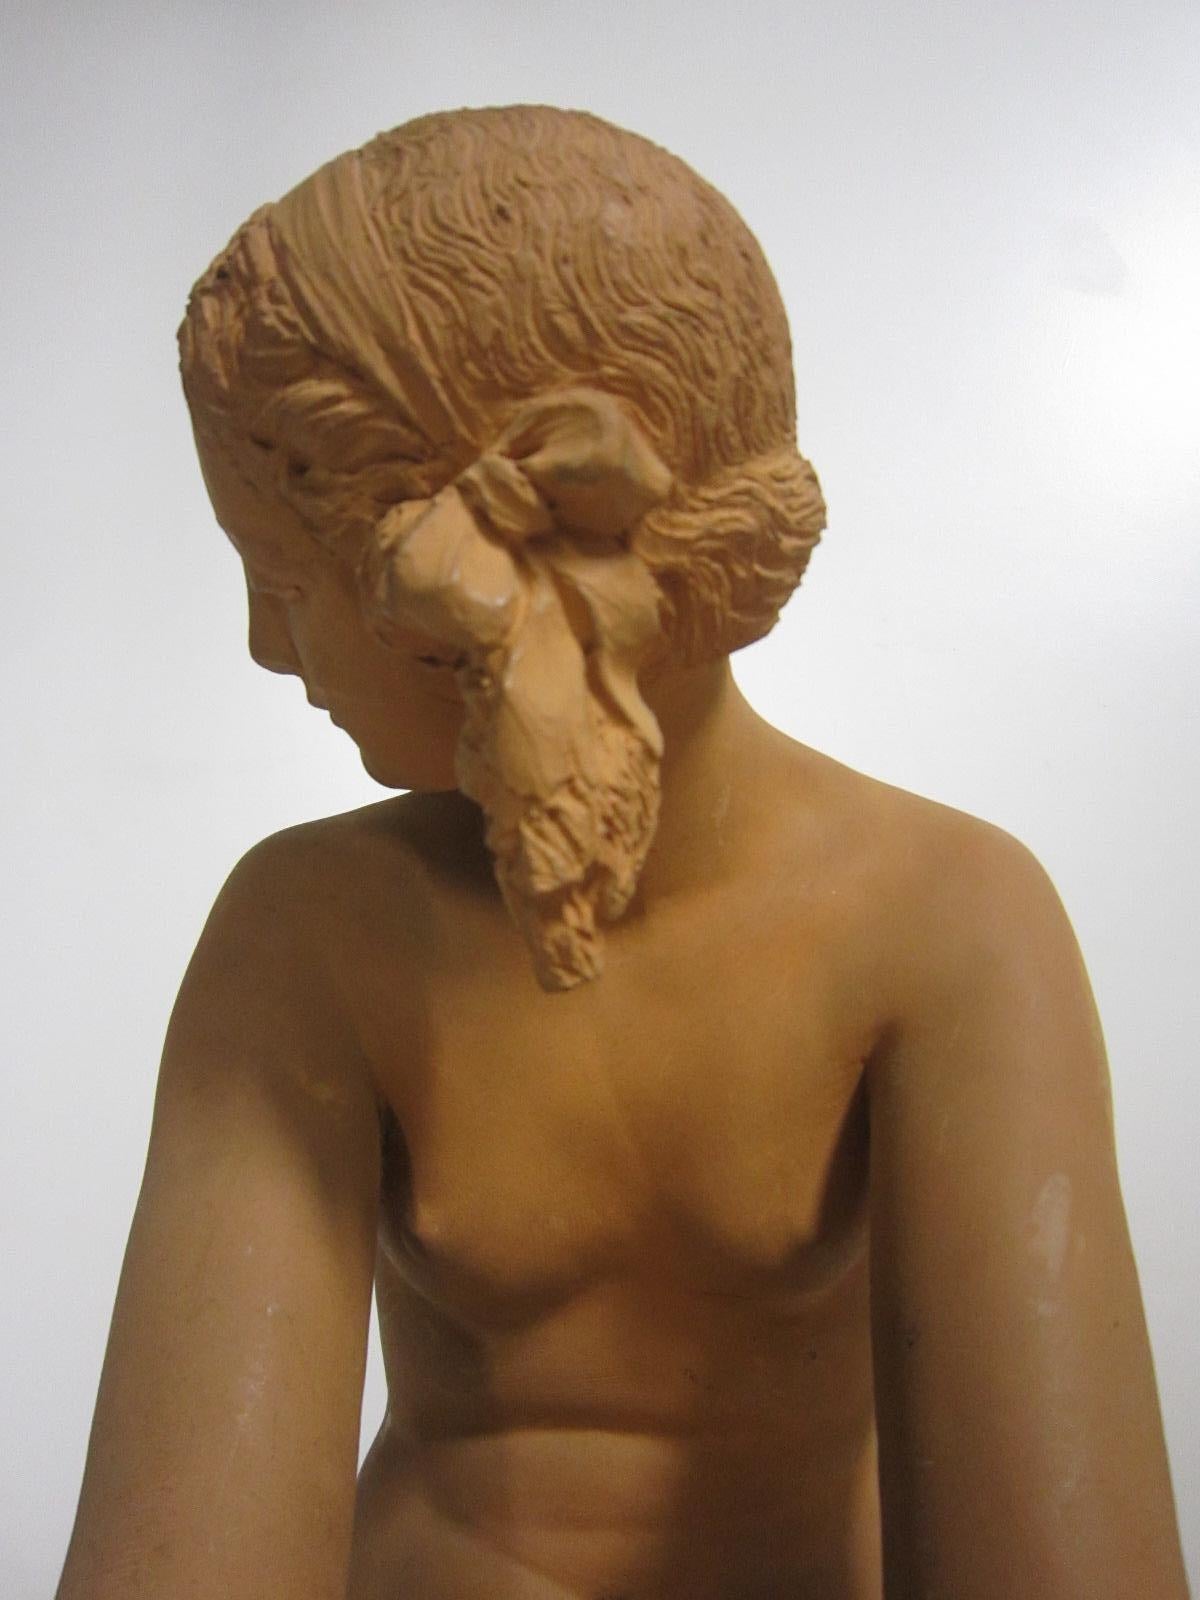 French Art Deco Terracotta Seated Nude with Doves, Signed Lormier 1